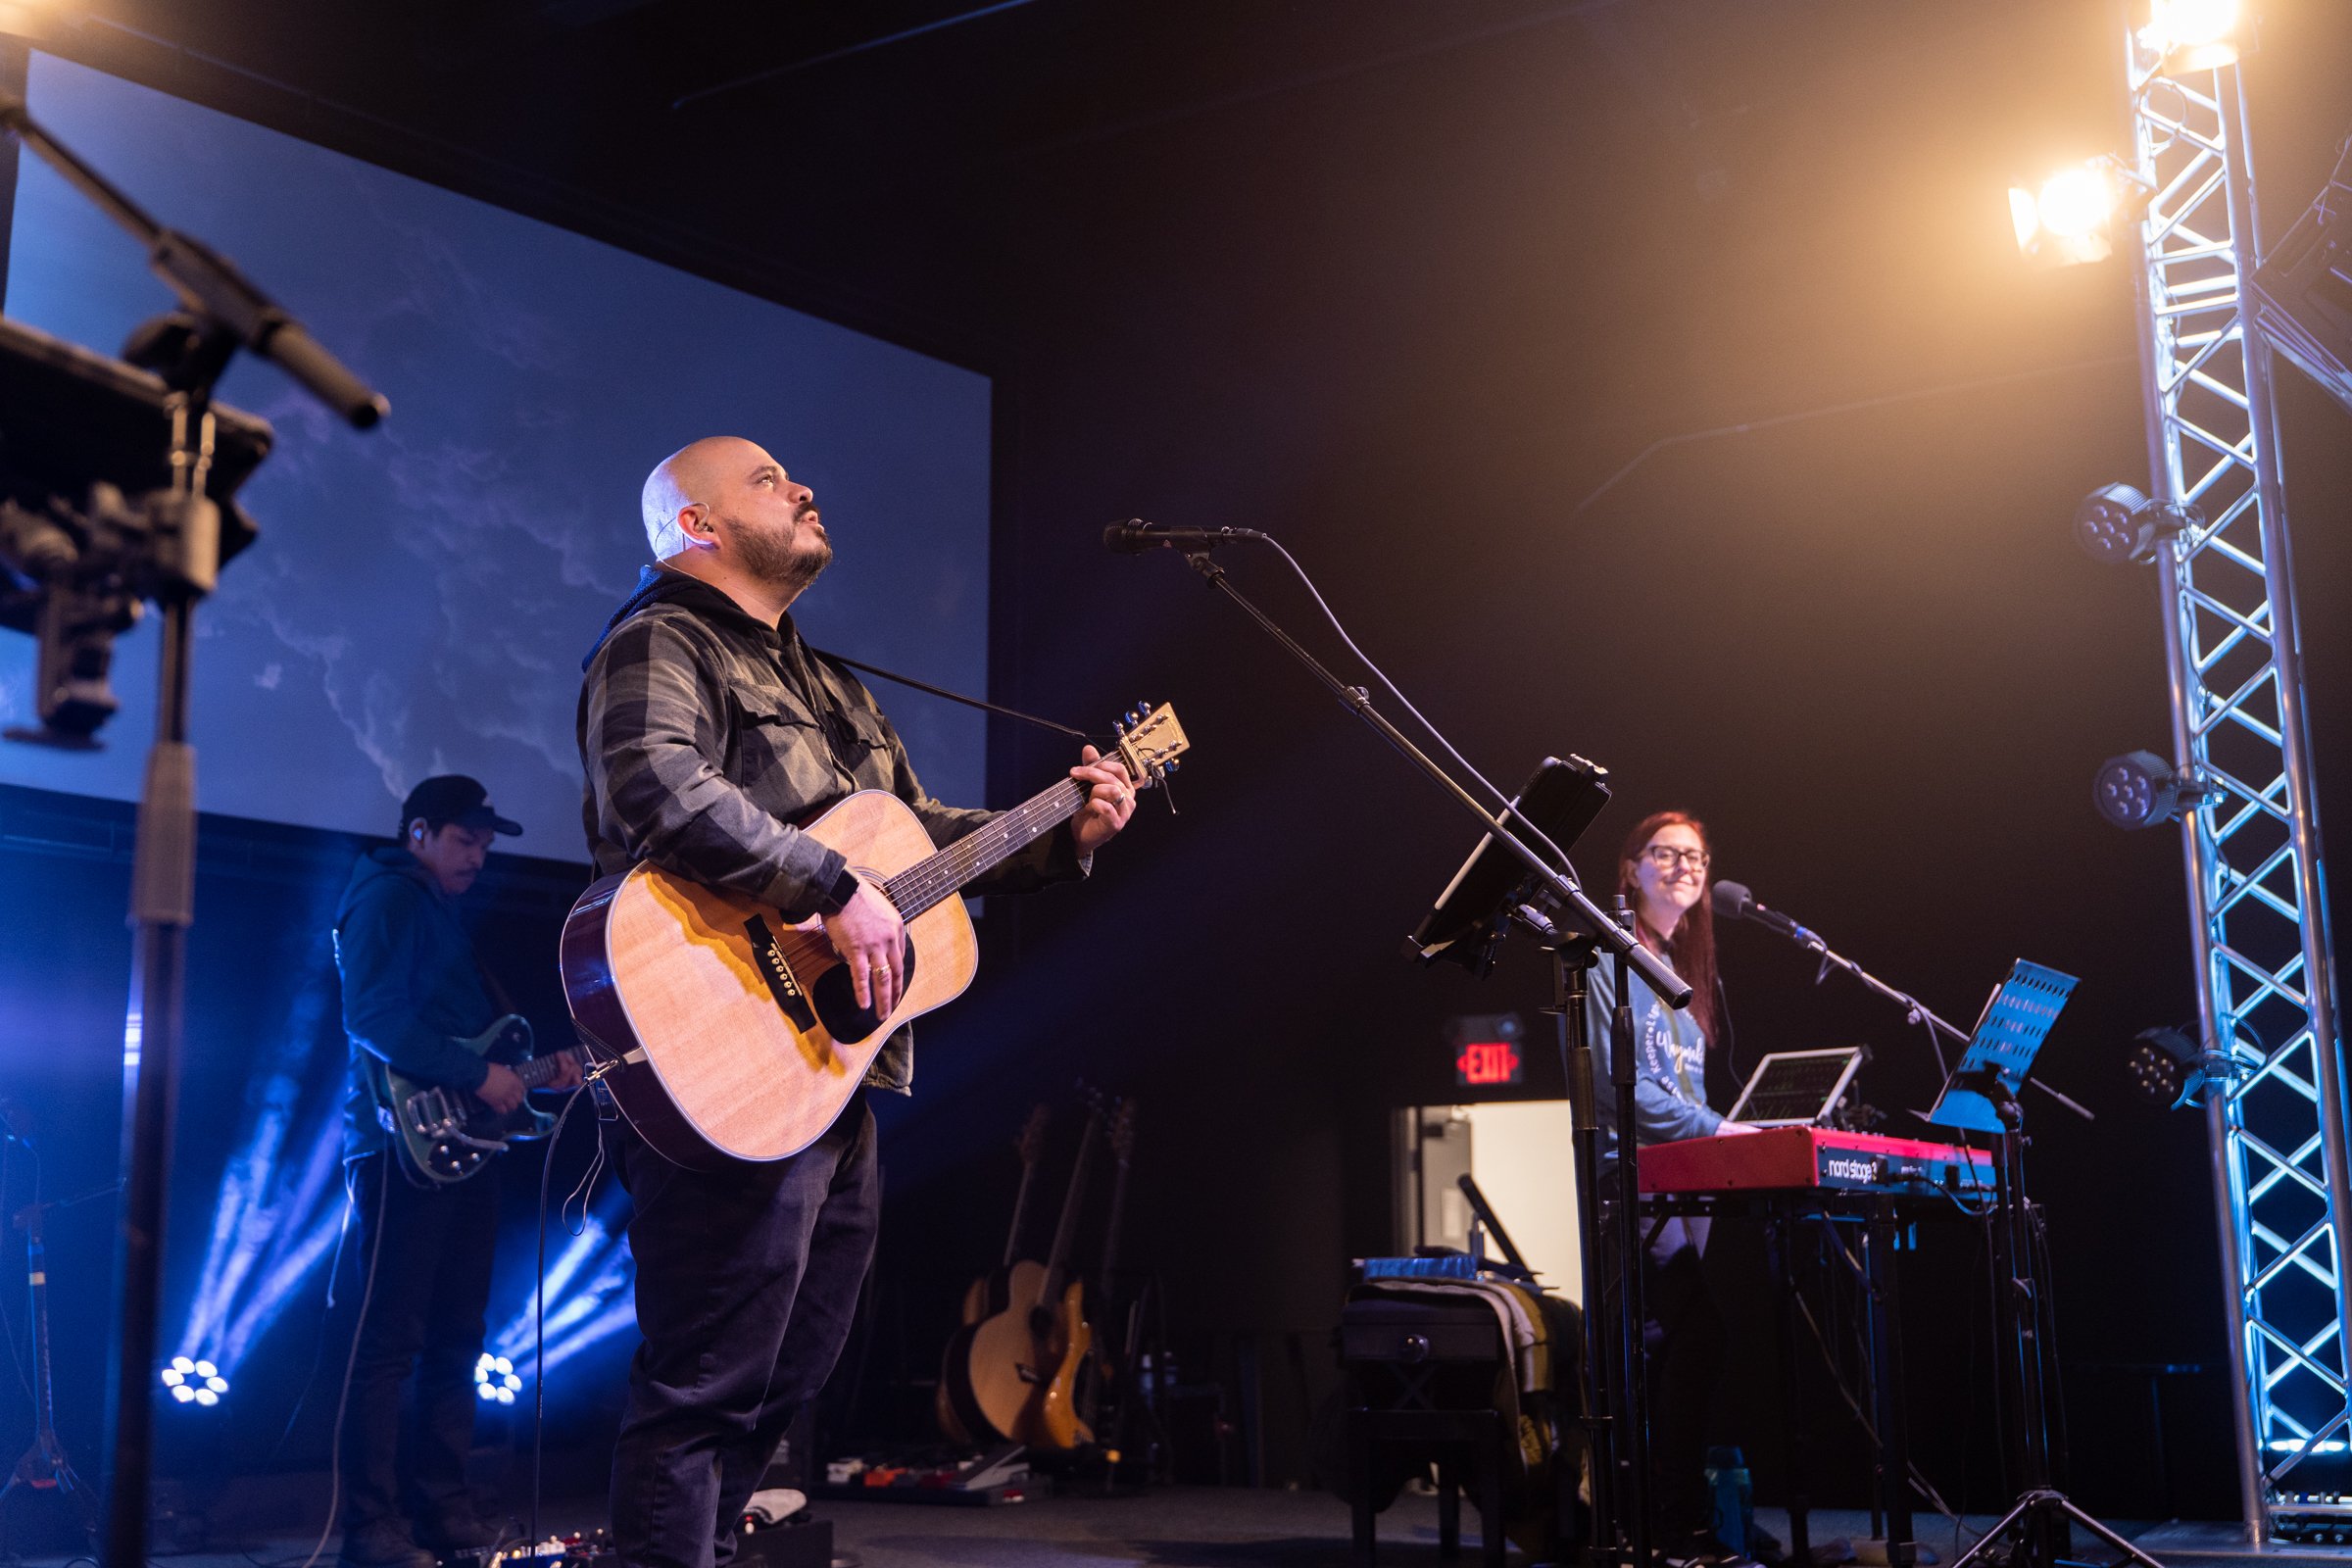  Pastor Travis Whitney leading worship during one of our monthly worship nights at our new building.  